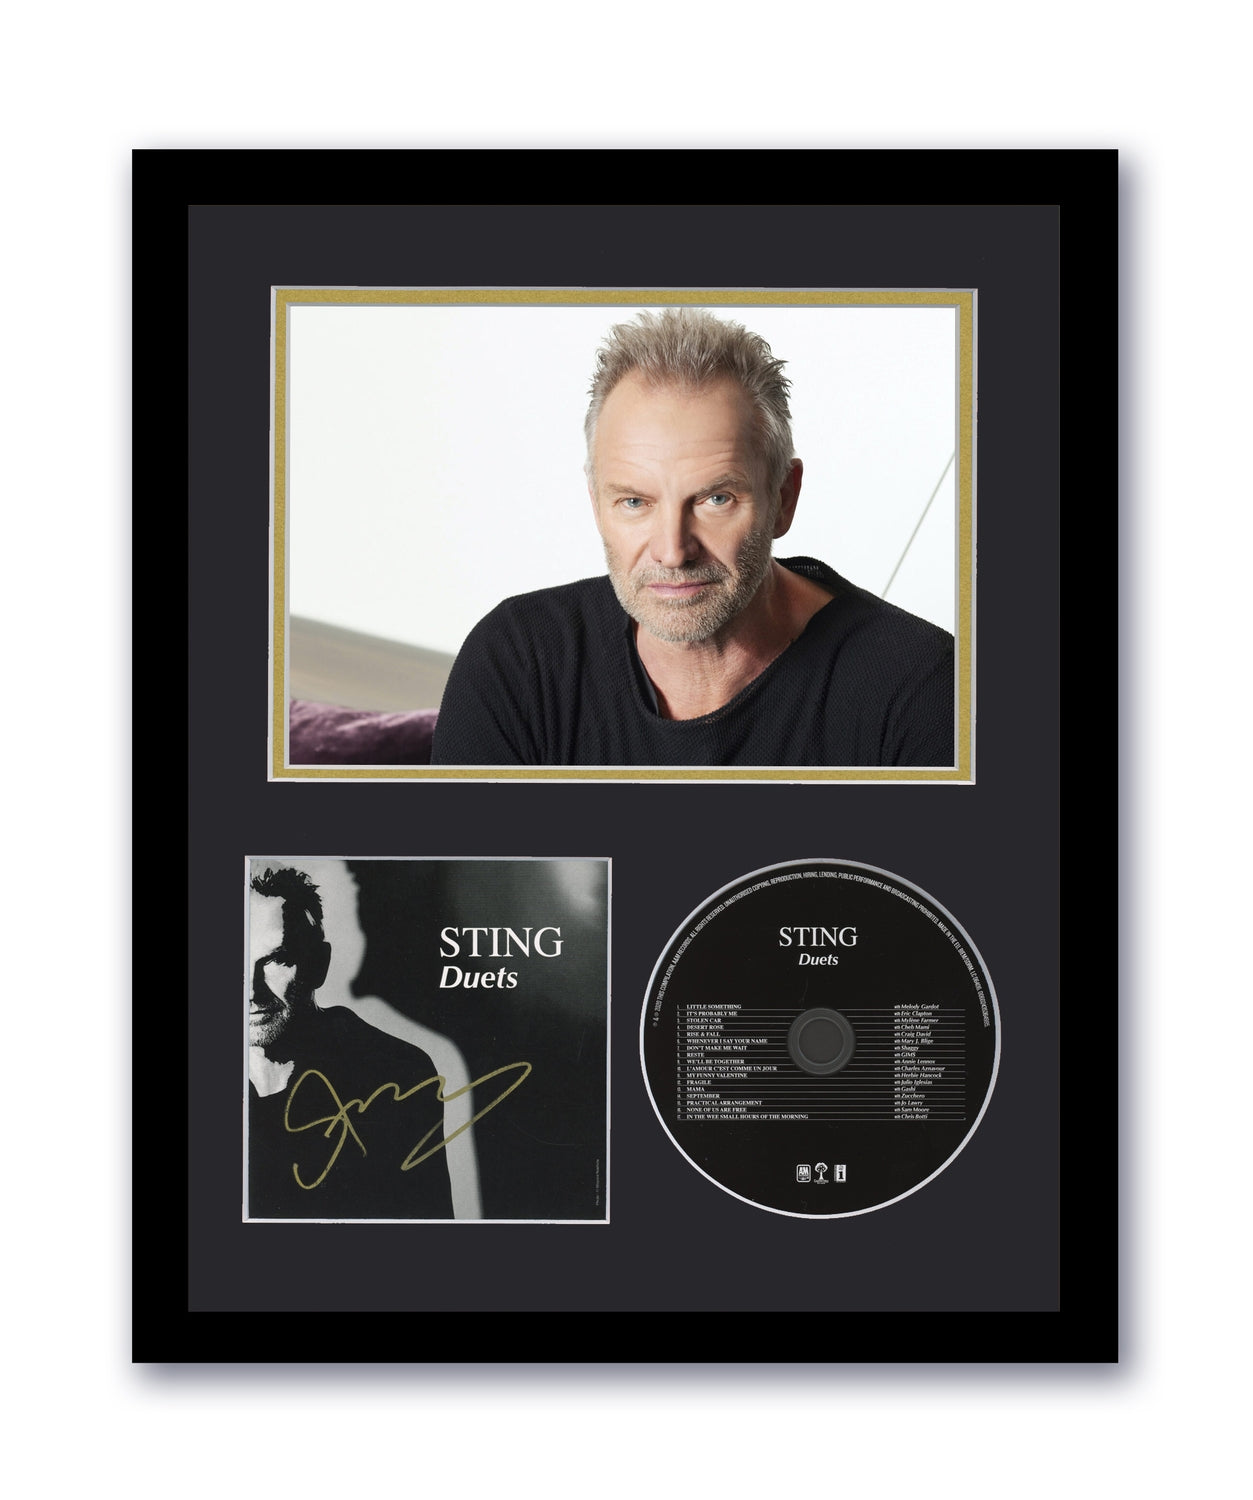 Sting Autographed Signed 11x14 Framed CD Photo Duets The Police ACOA 3